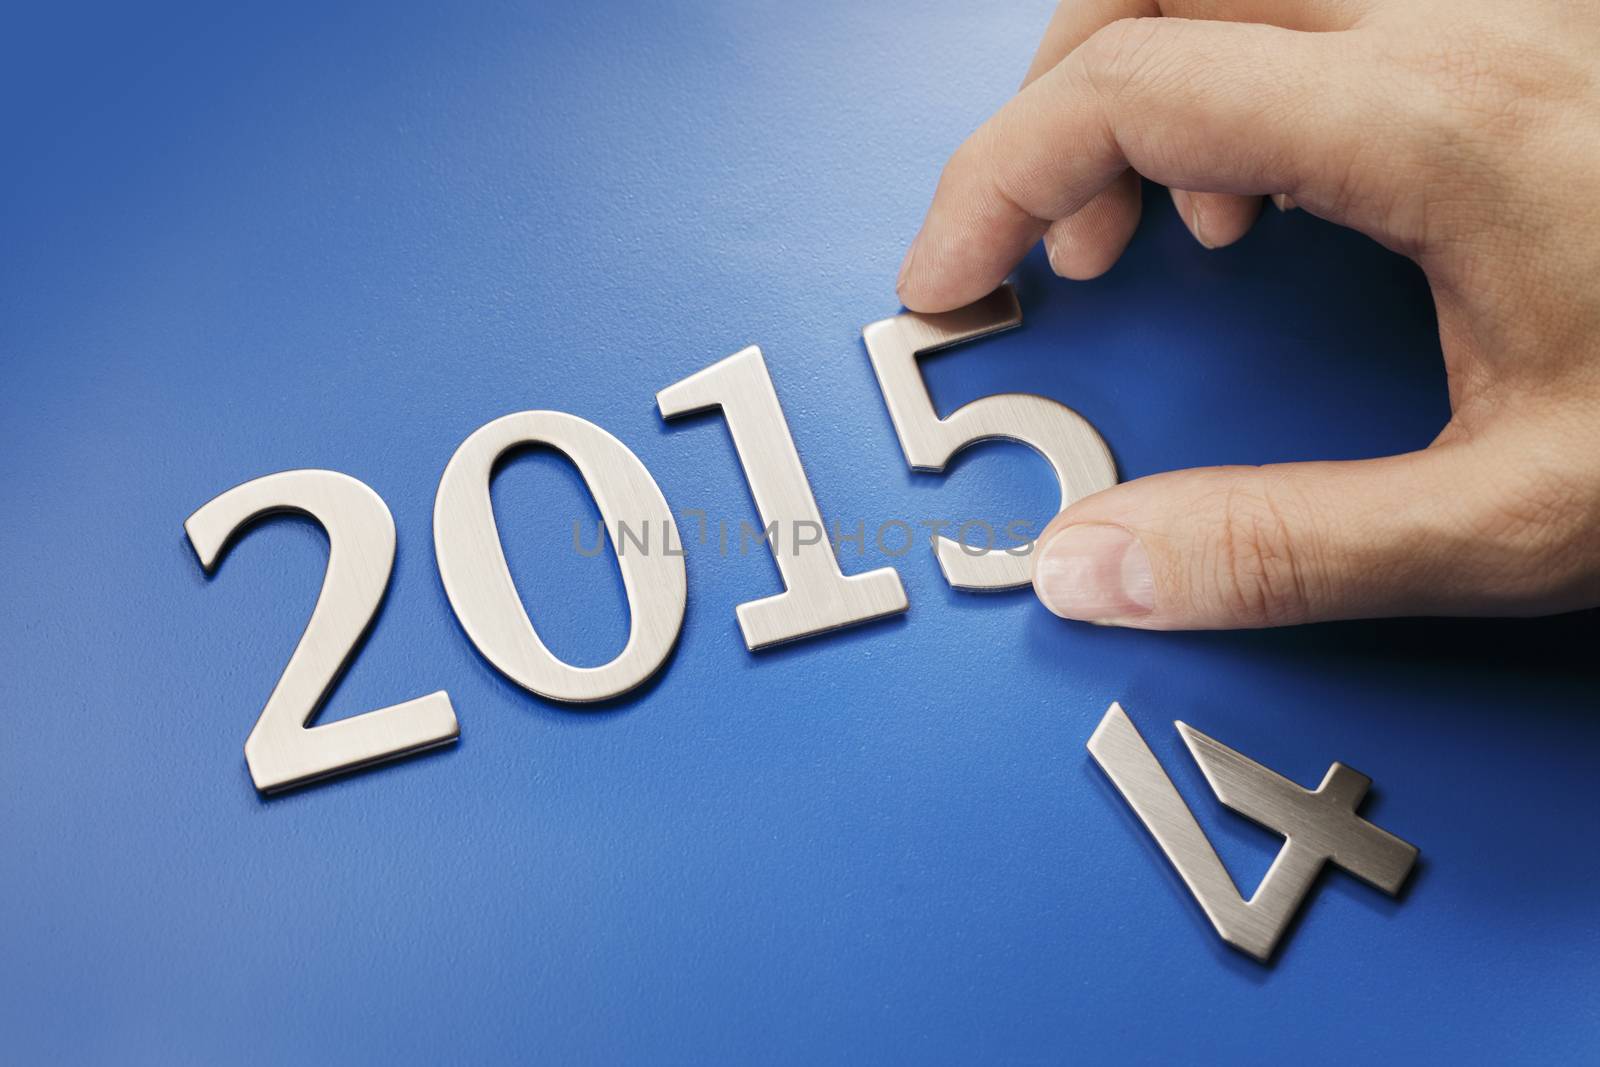 What's in for year 2015 by Stocksnapper